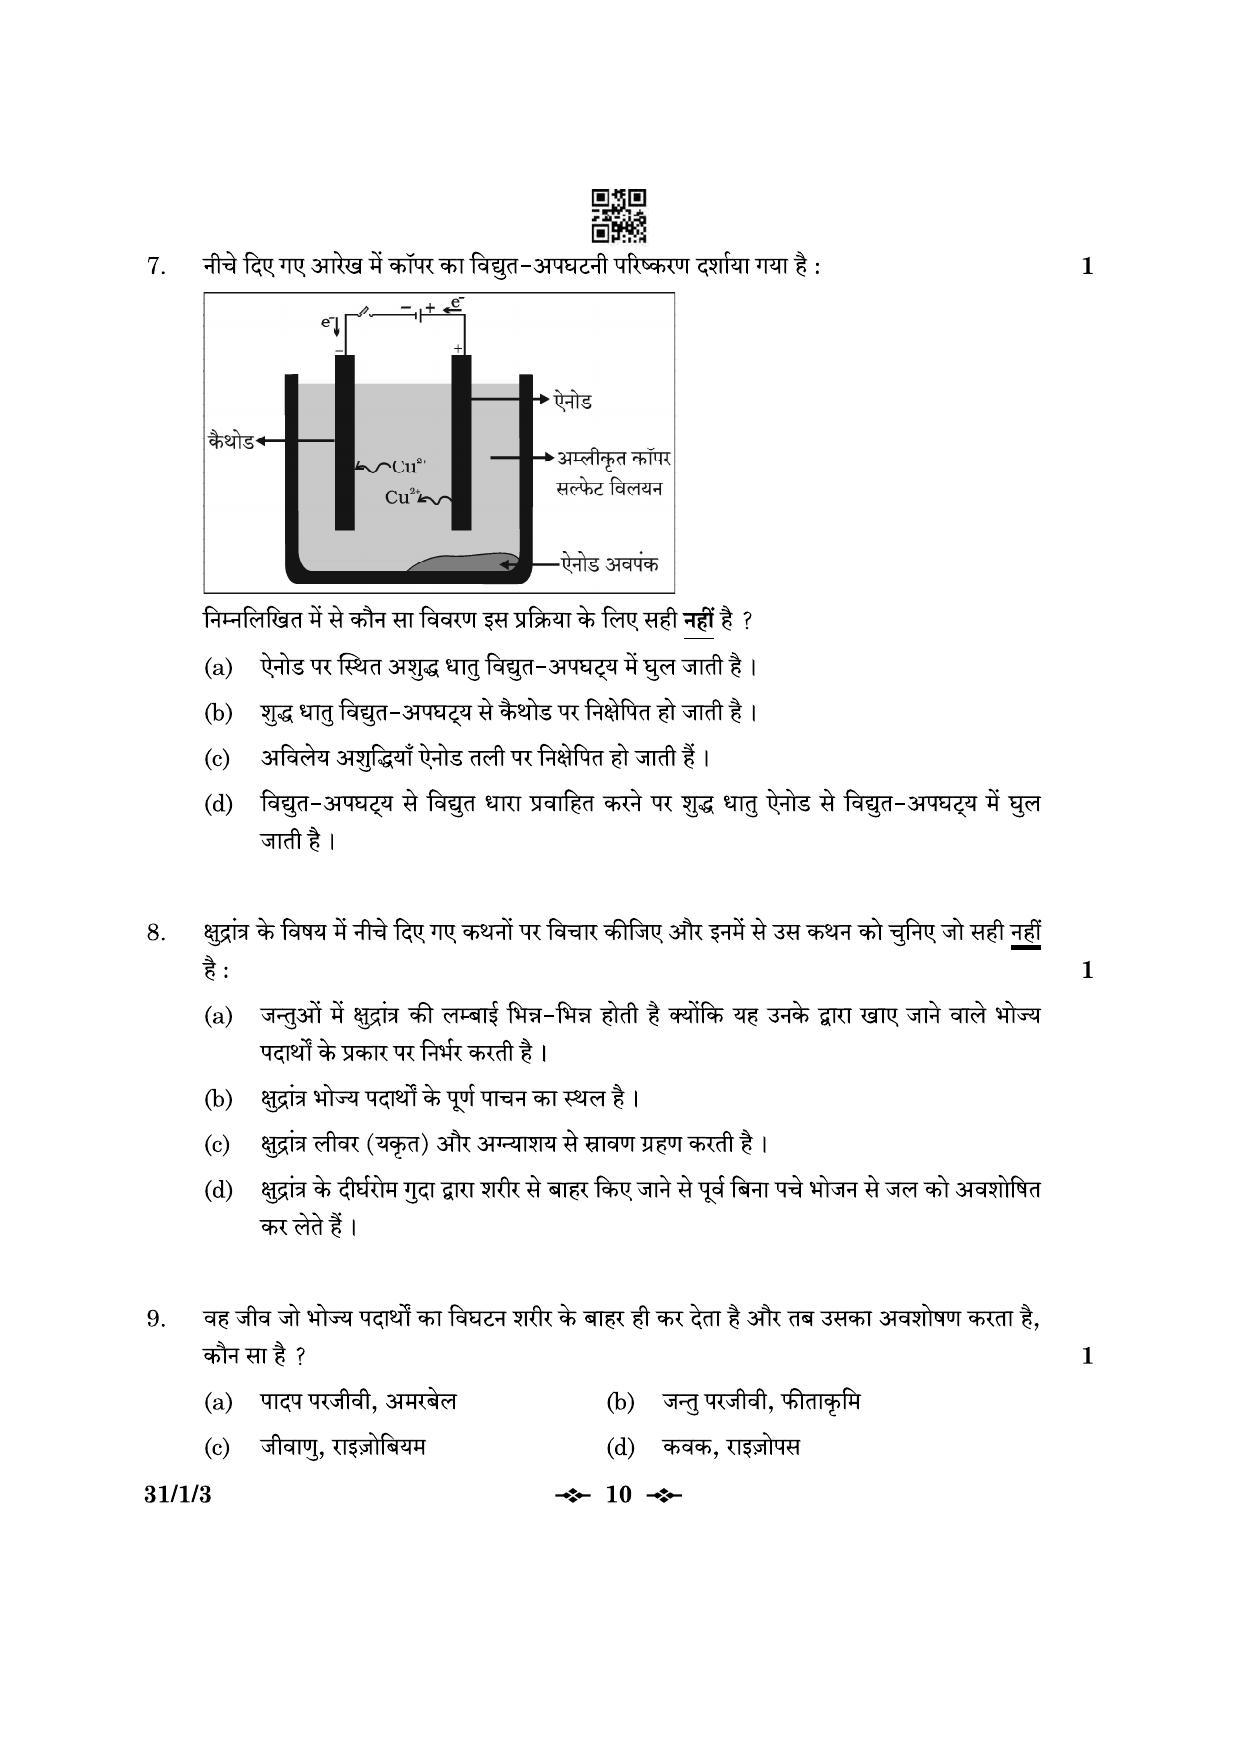 CBSE Class 10 31-1-3 Science 2023 Question Paper - Page 10